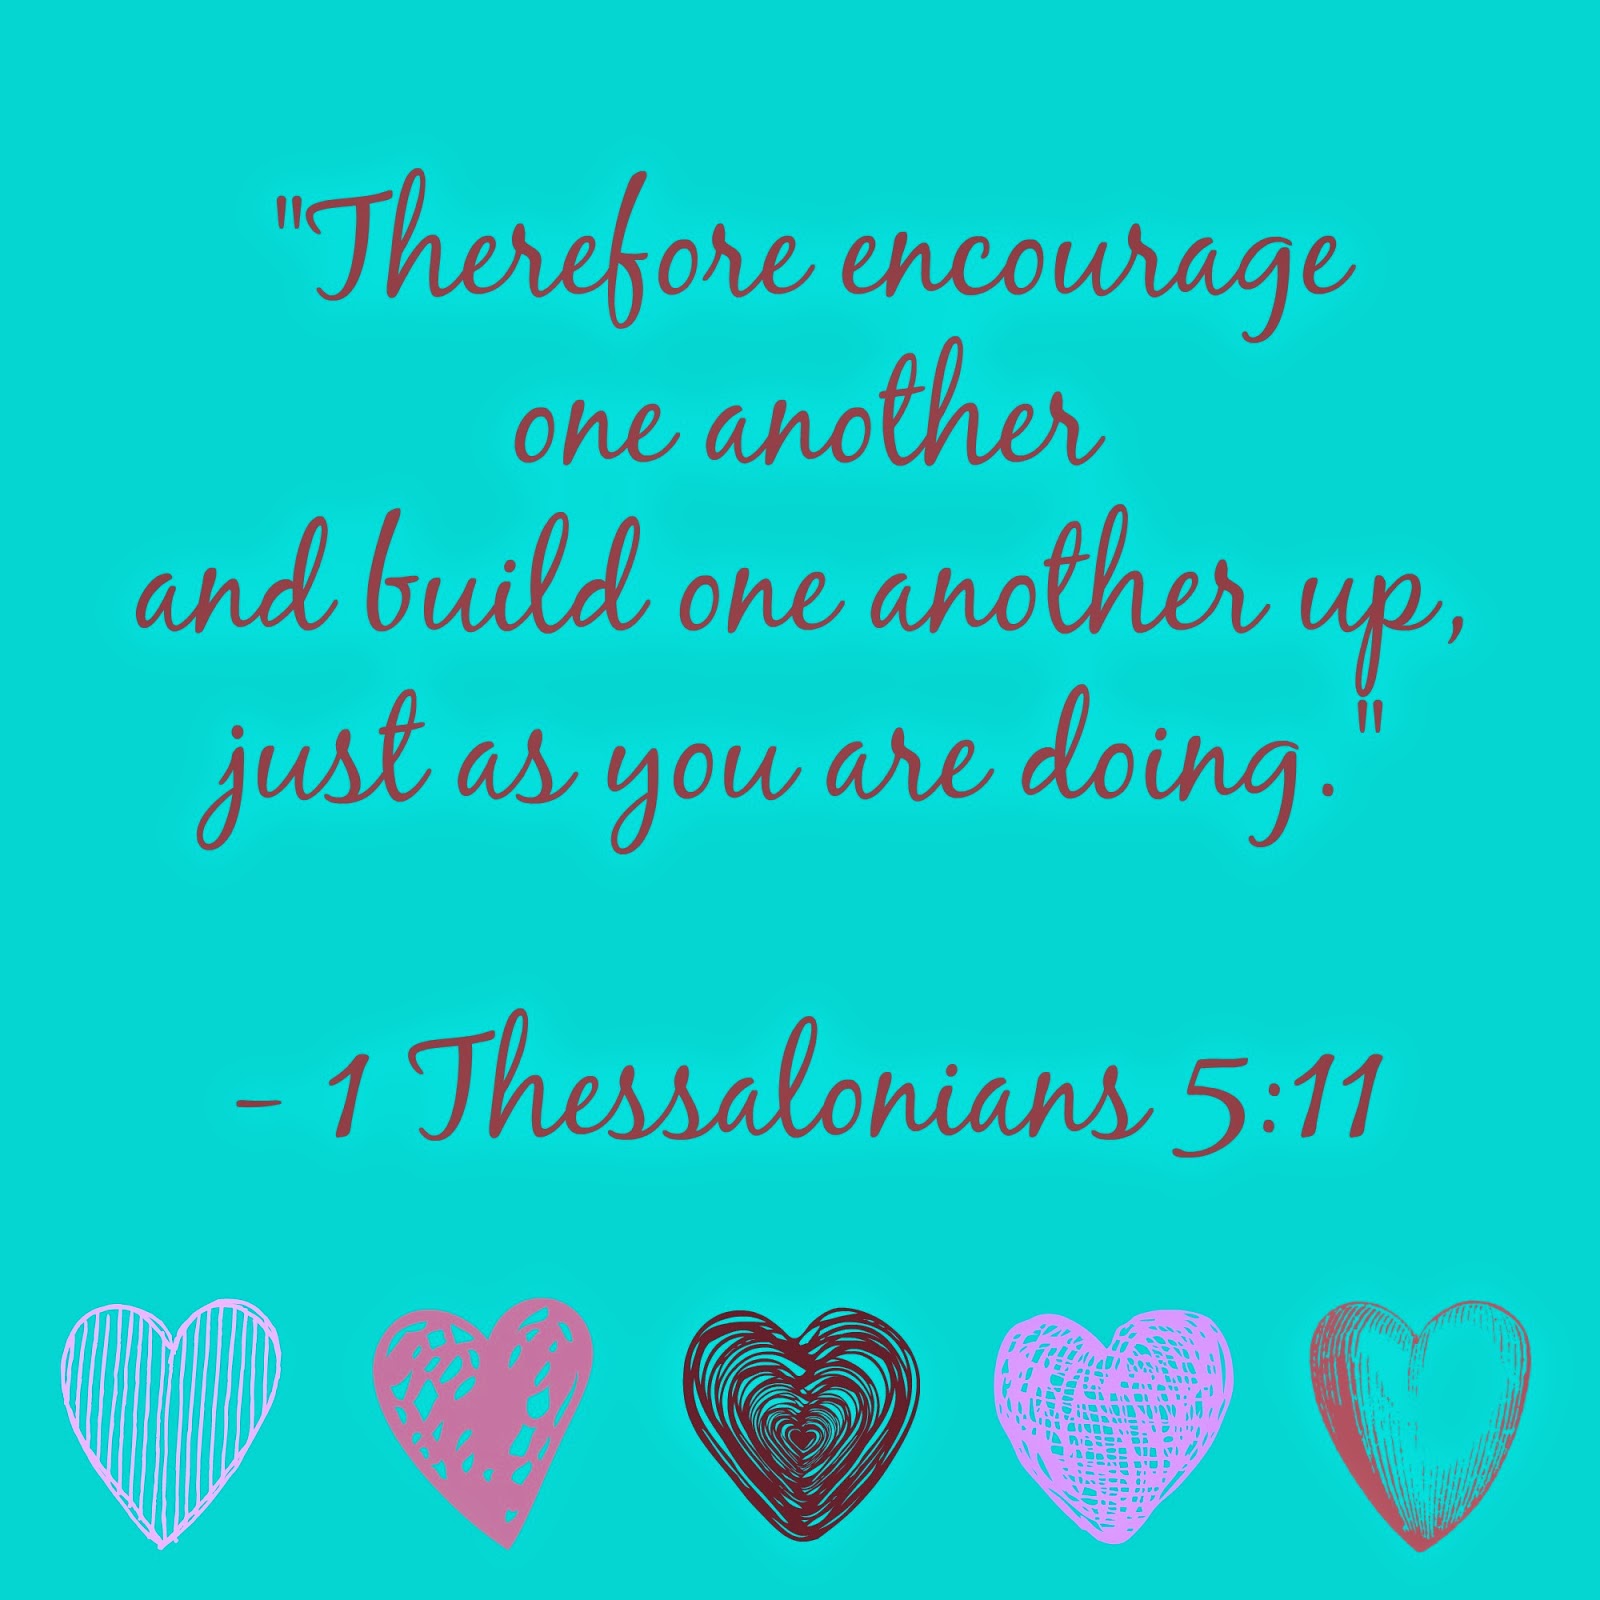 "Therefore encourage one another and build one another up, just as you are doing." #amysgift